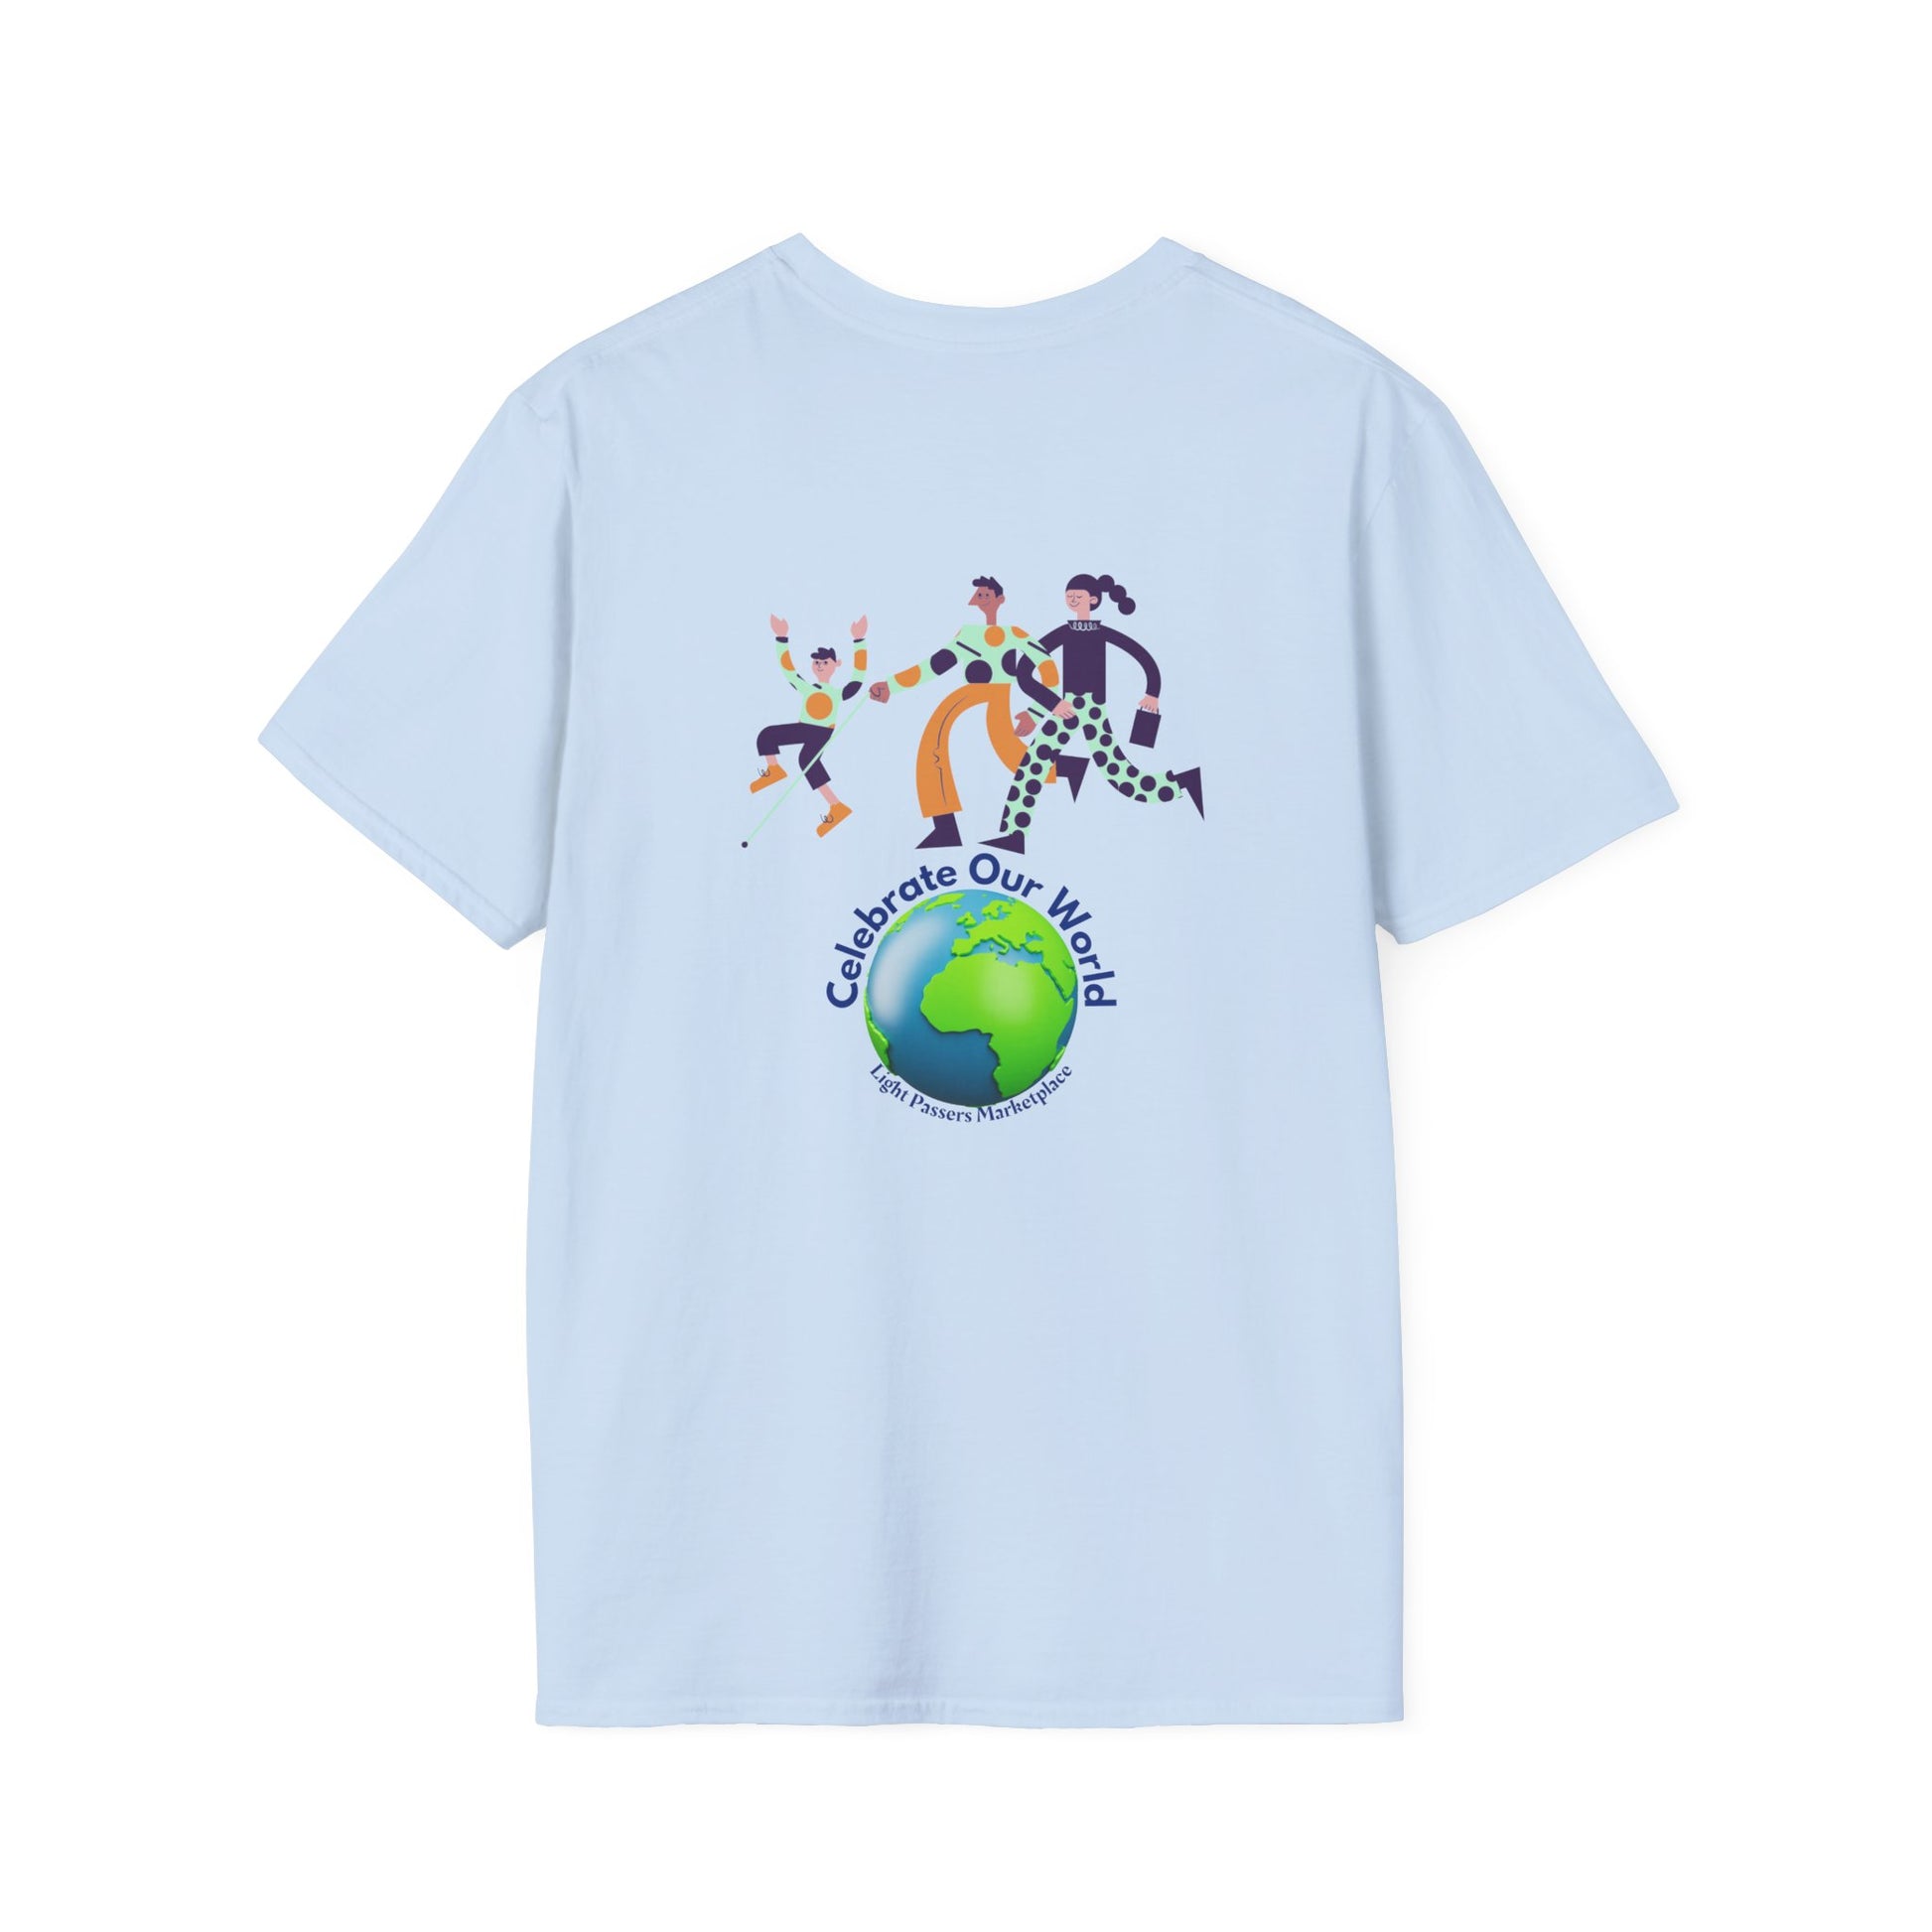 A white unisex t-shirt featuring a globe and dancing people, made of soft 100% ring-spun cotton. Ethically sourced and durable, ideal for versatile, comfortable wear year-round.